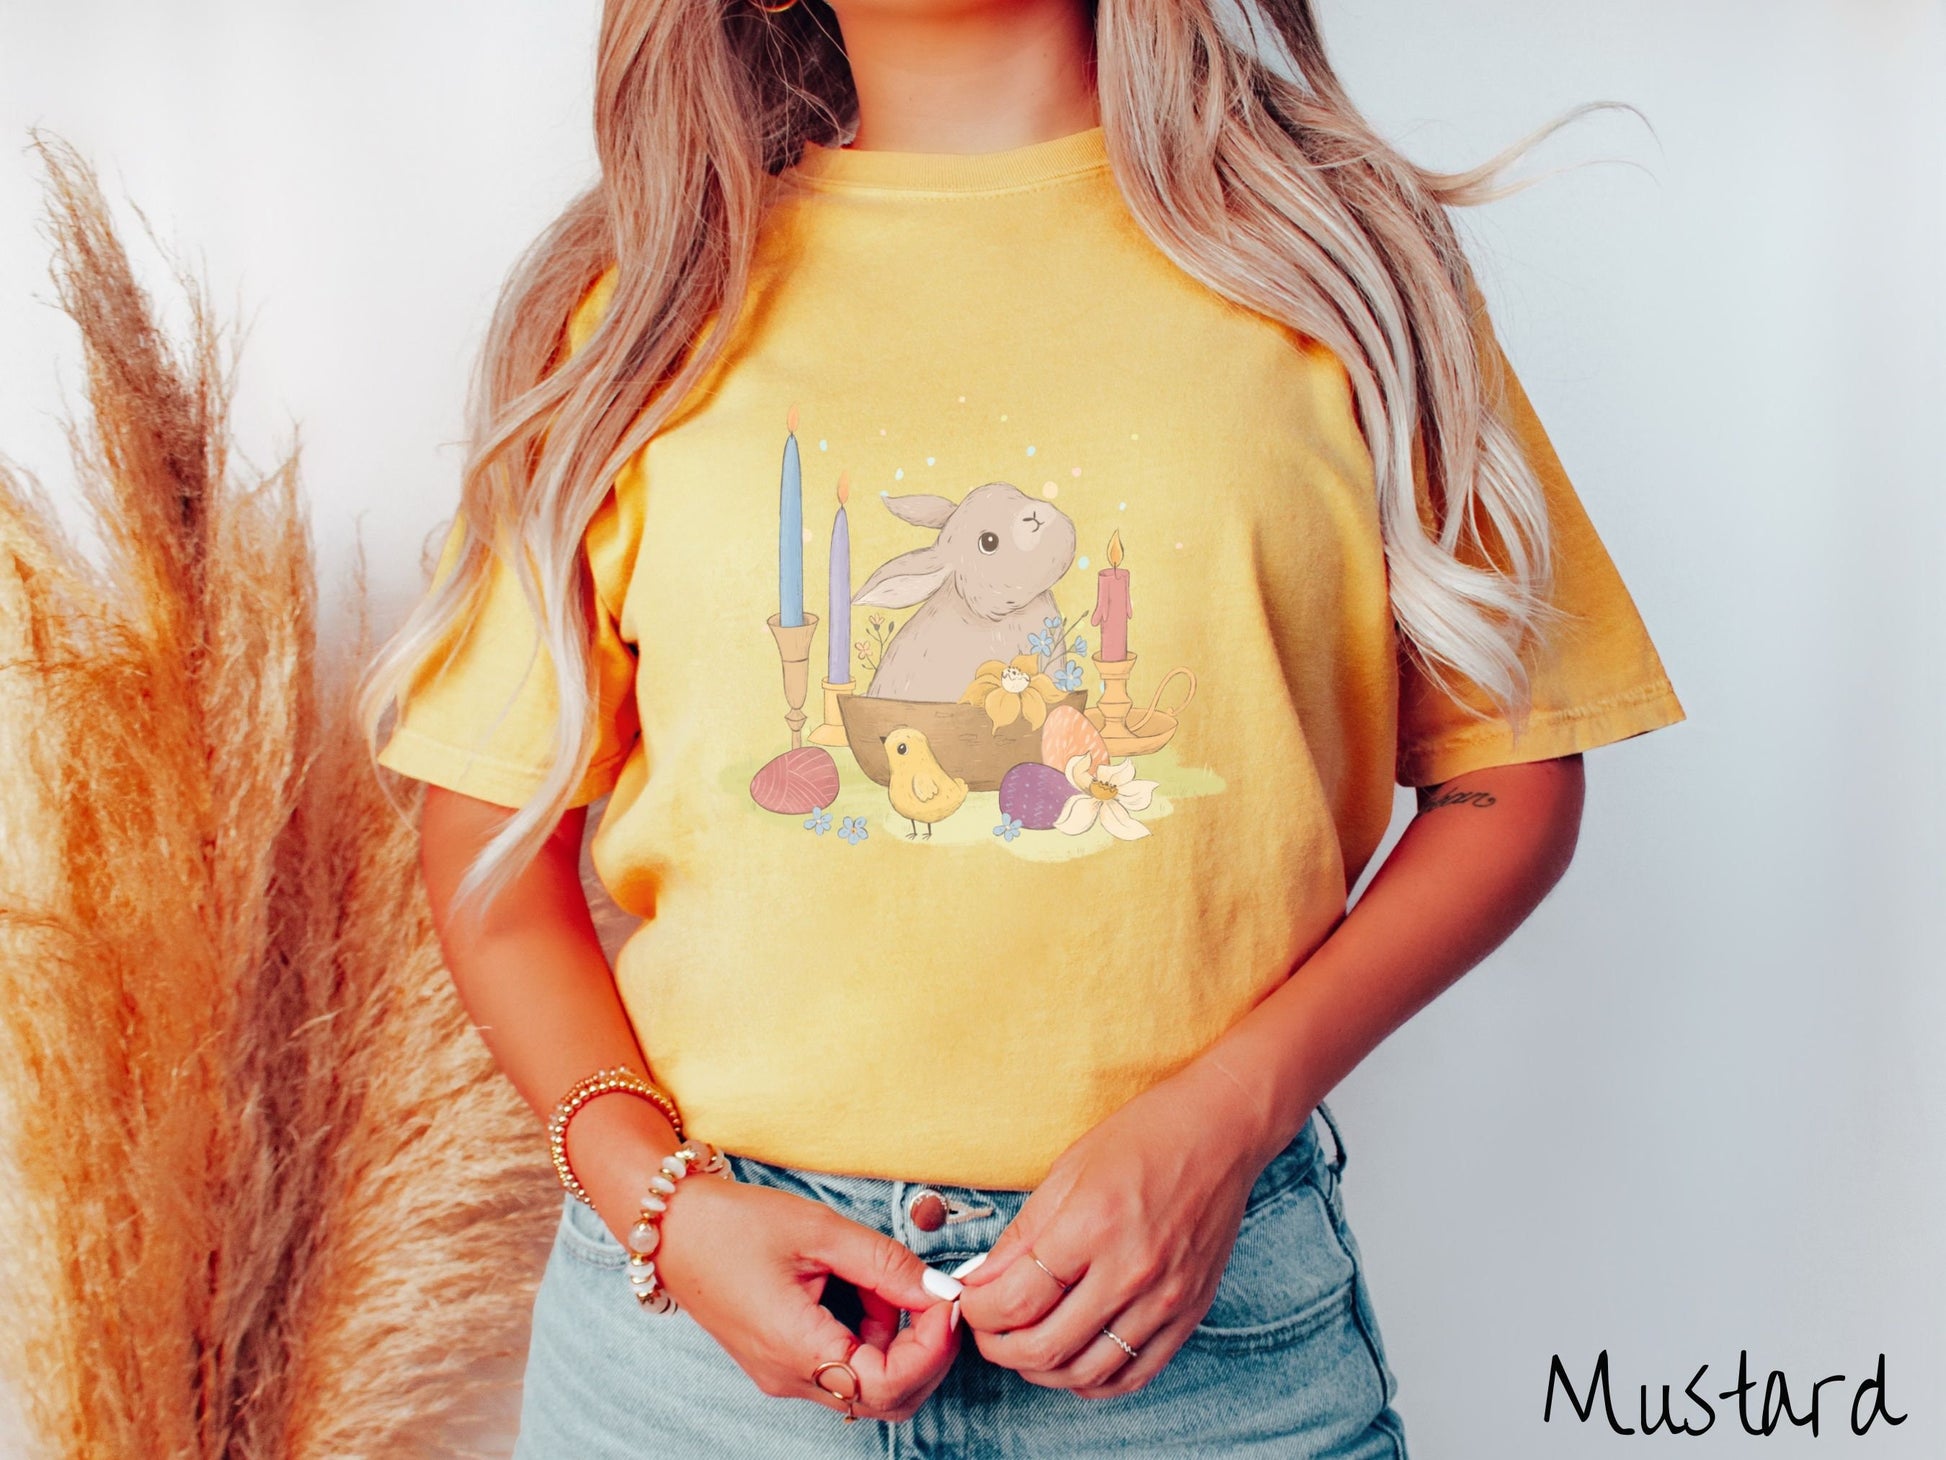 A woman wearing a cute, vintage mustard colored shirt with a gray bunny rabbit sitting in between three lit candles, some red, orange, and purple eggs, and yellow and white flowers.